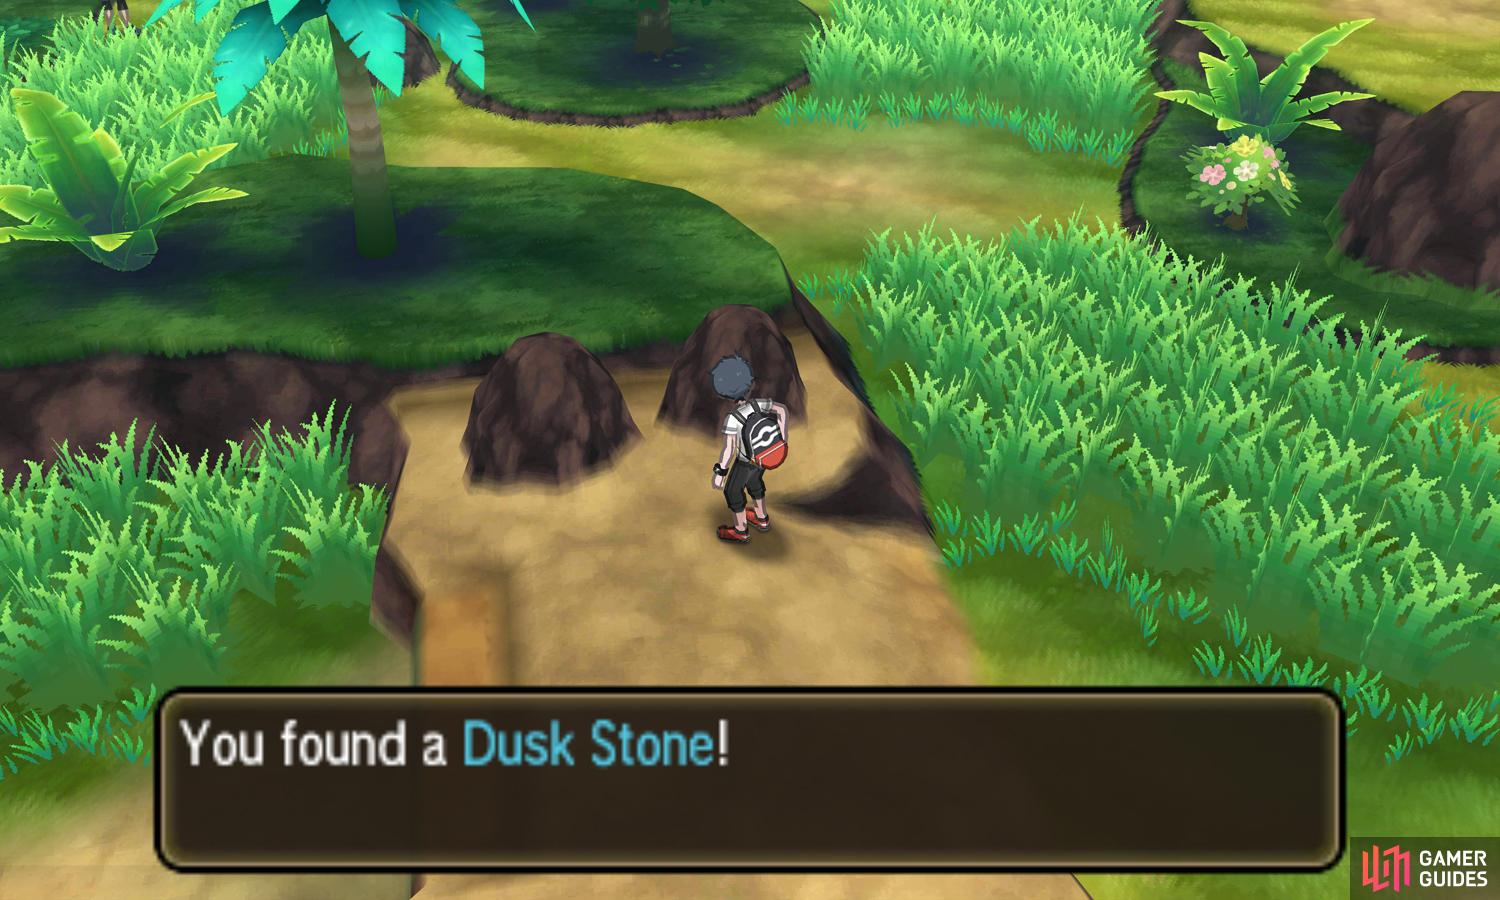 Murkrow and Misdreavus will benefit from the Dusk Stone.